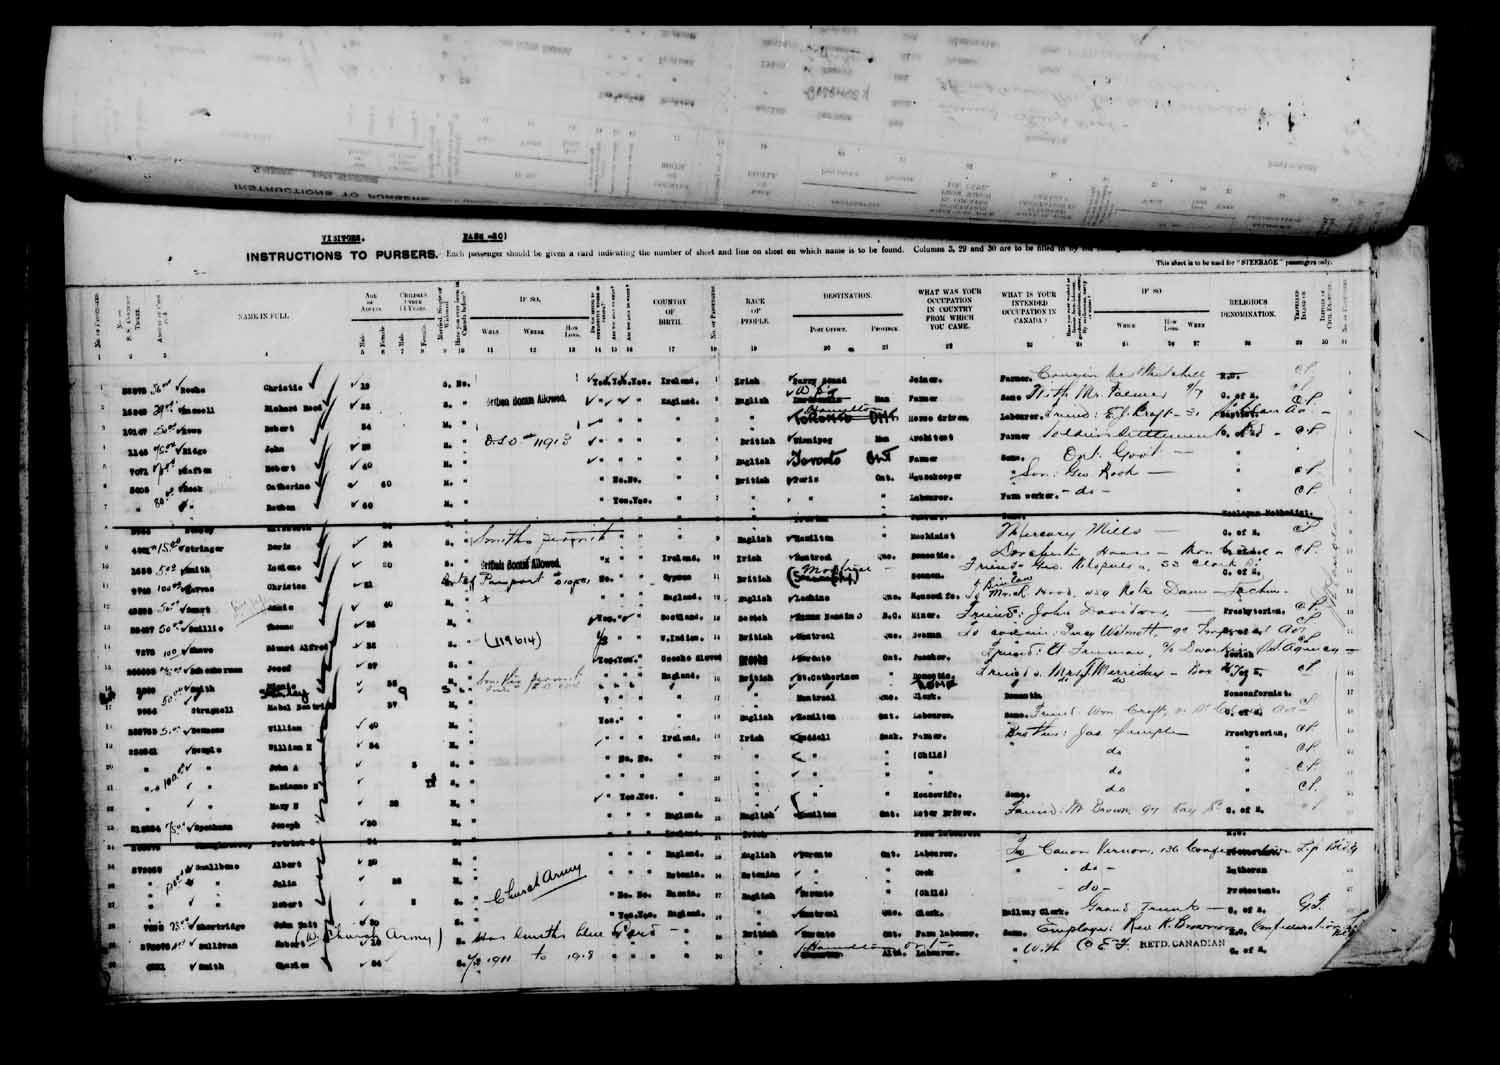 Digitized page of Passenger Lists for Image No.: e003610660